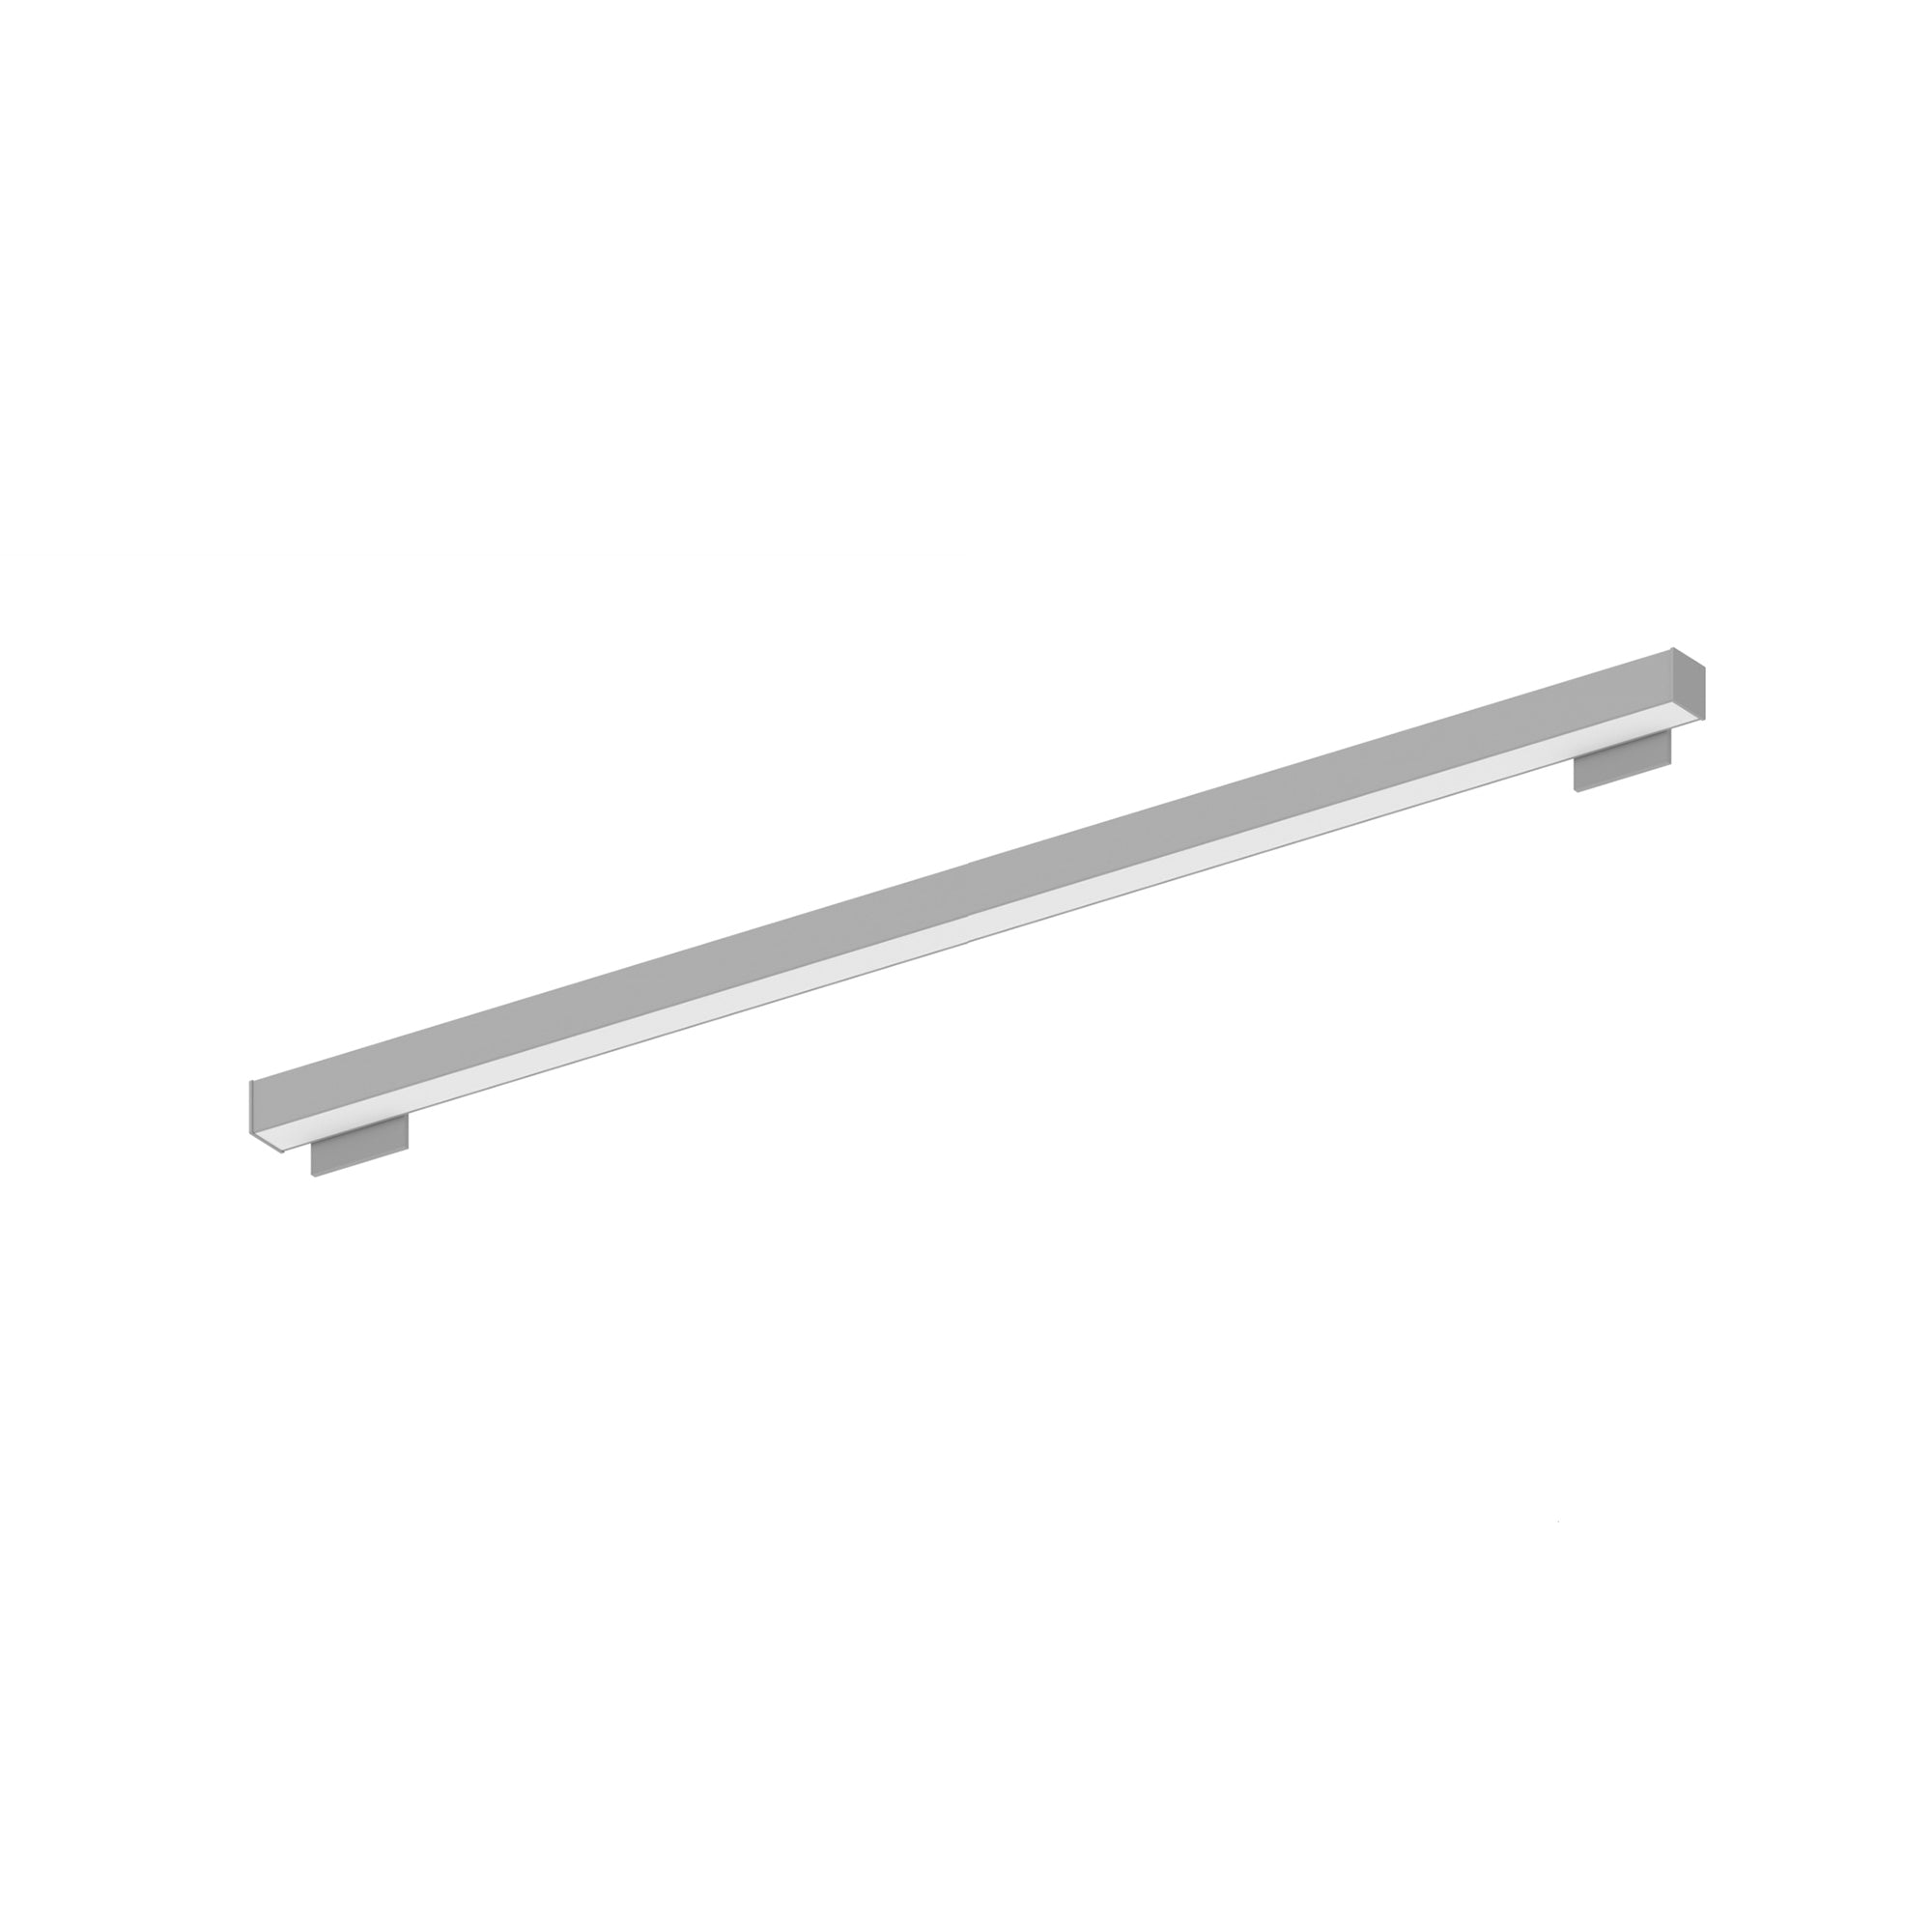 Nora Lighting NWLIN-81030A/L4P-R4 - Linear - 8' L-Line LED Wall Mount Linear, 8400lm / 3000K, 4 Inchx4 Inch Left Plate & 4 Inchx4 Inch Right Plate, Left Power Feed, Aluminum Finish